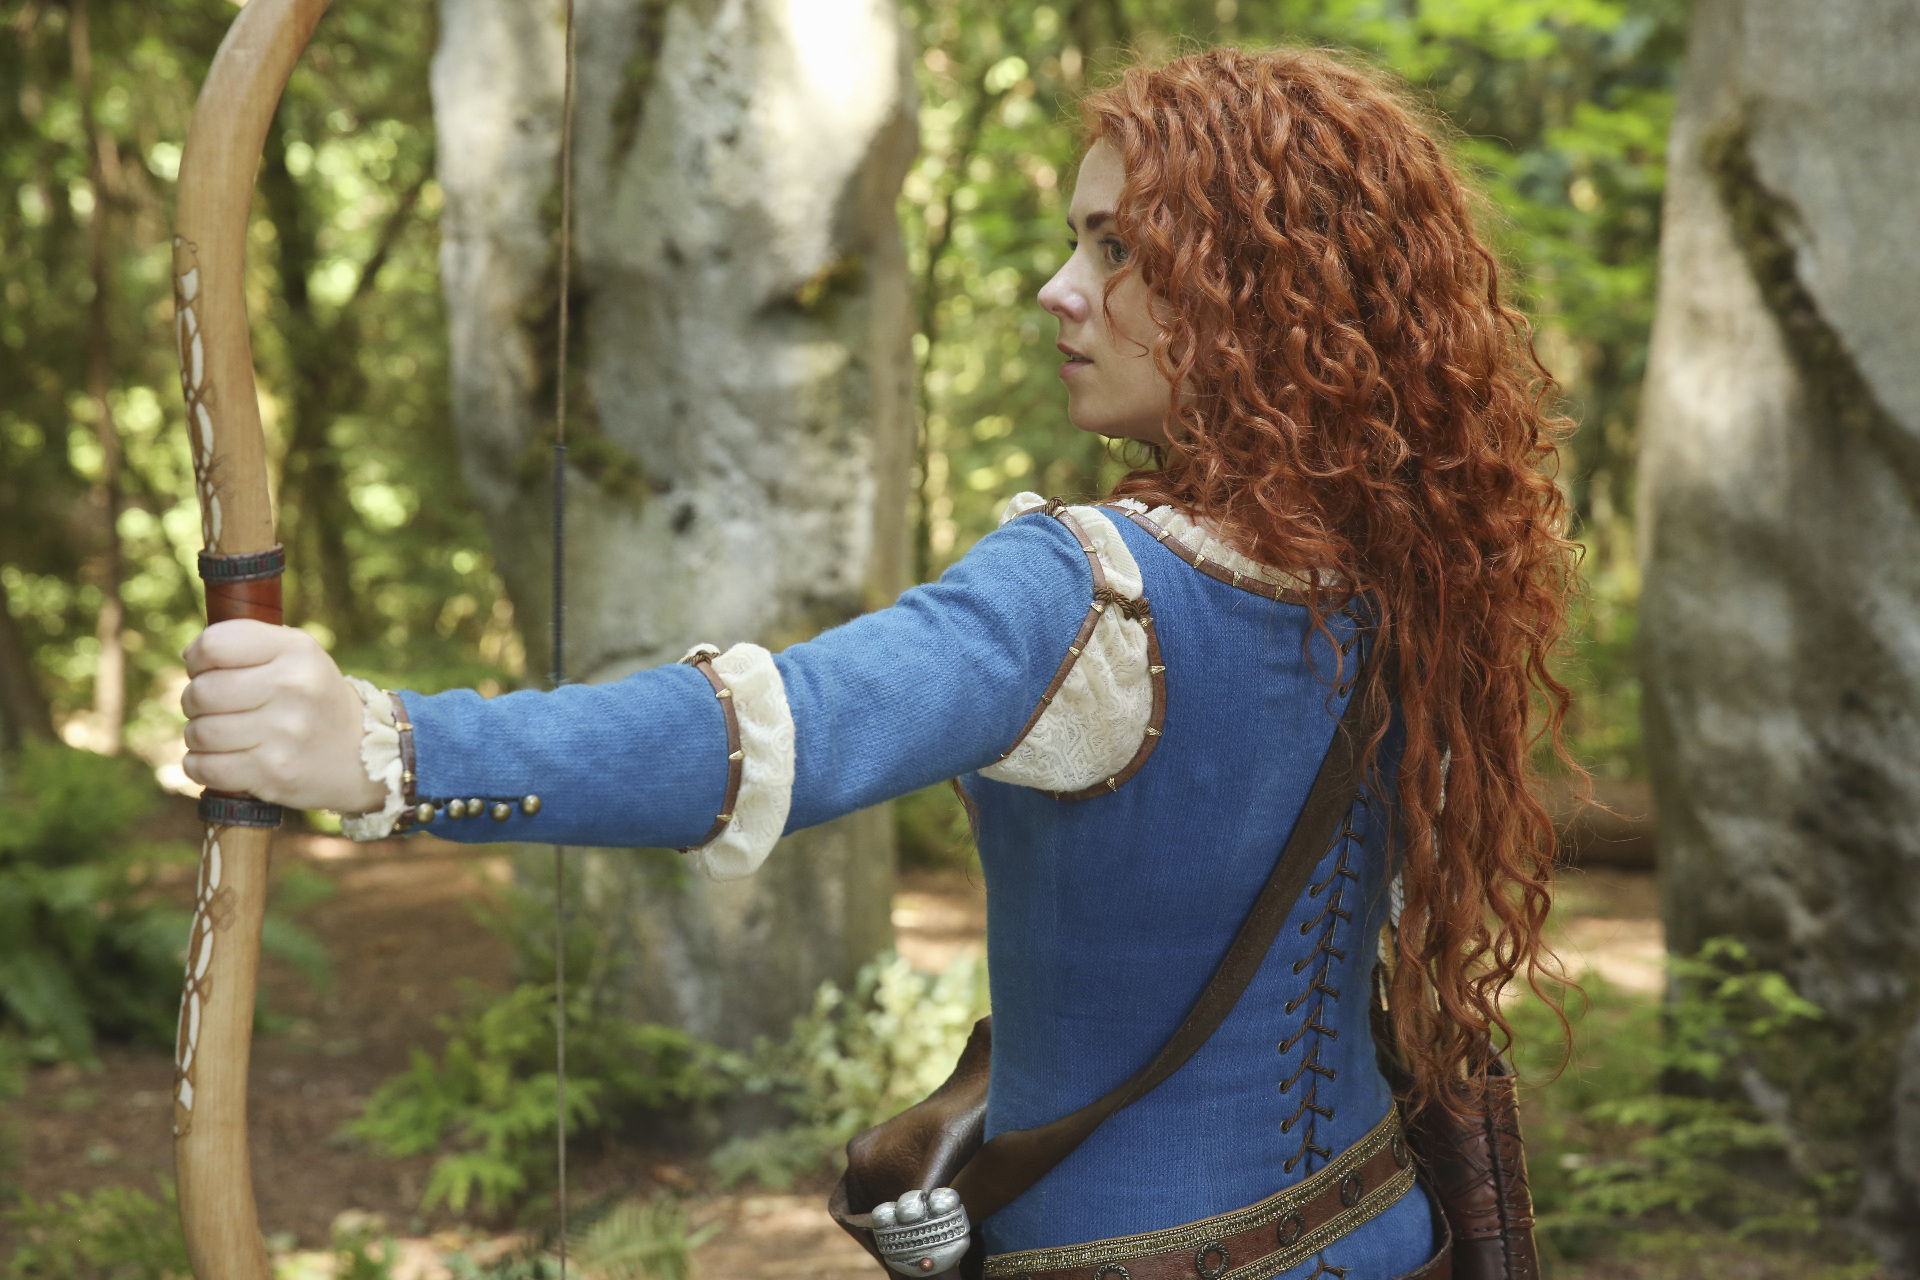 Still of Amy Manson in Once Upon a Time (2011)